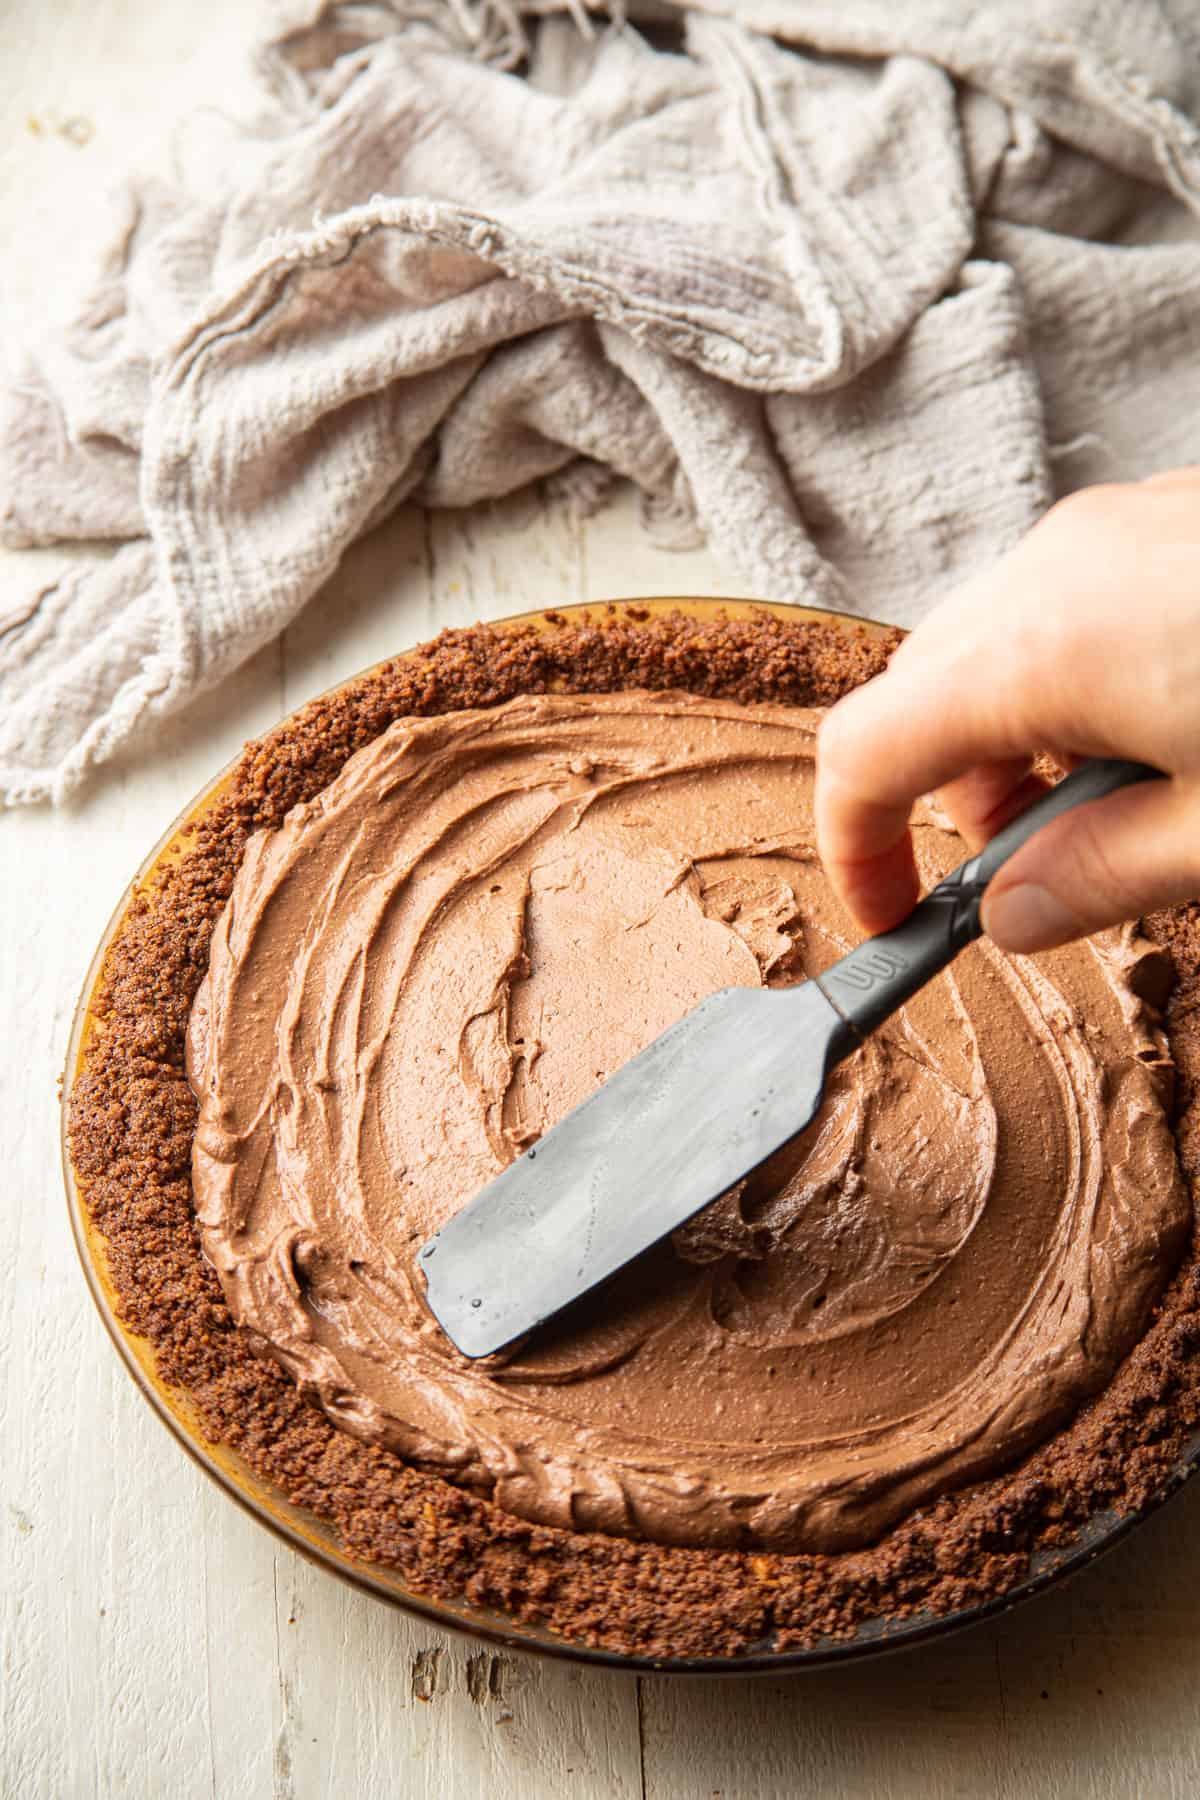 Hand using a spatula to spread chocolate filling in a pie crust.